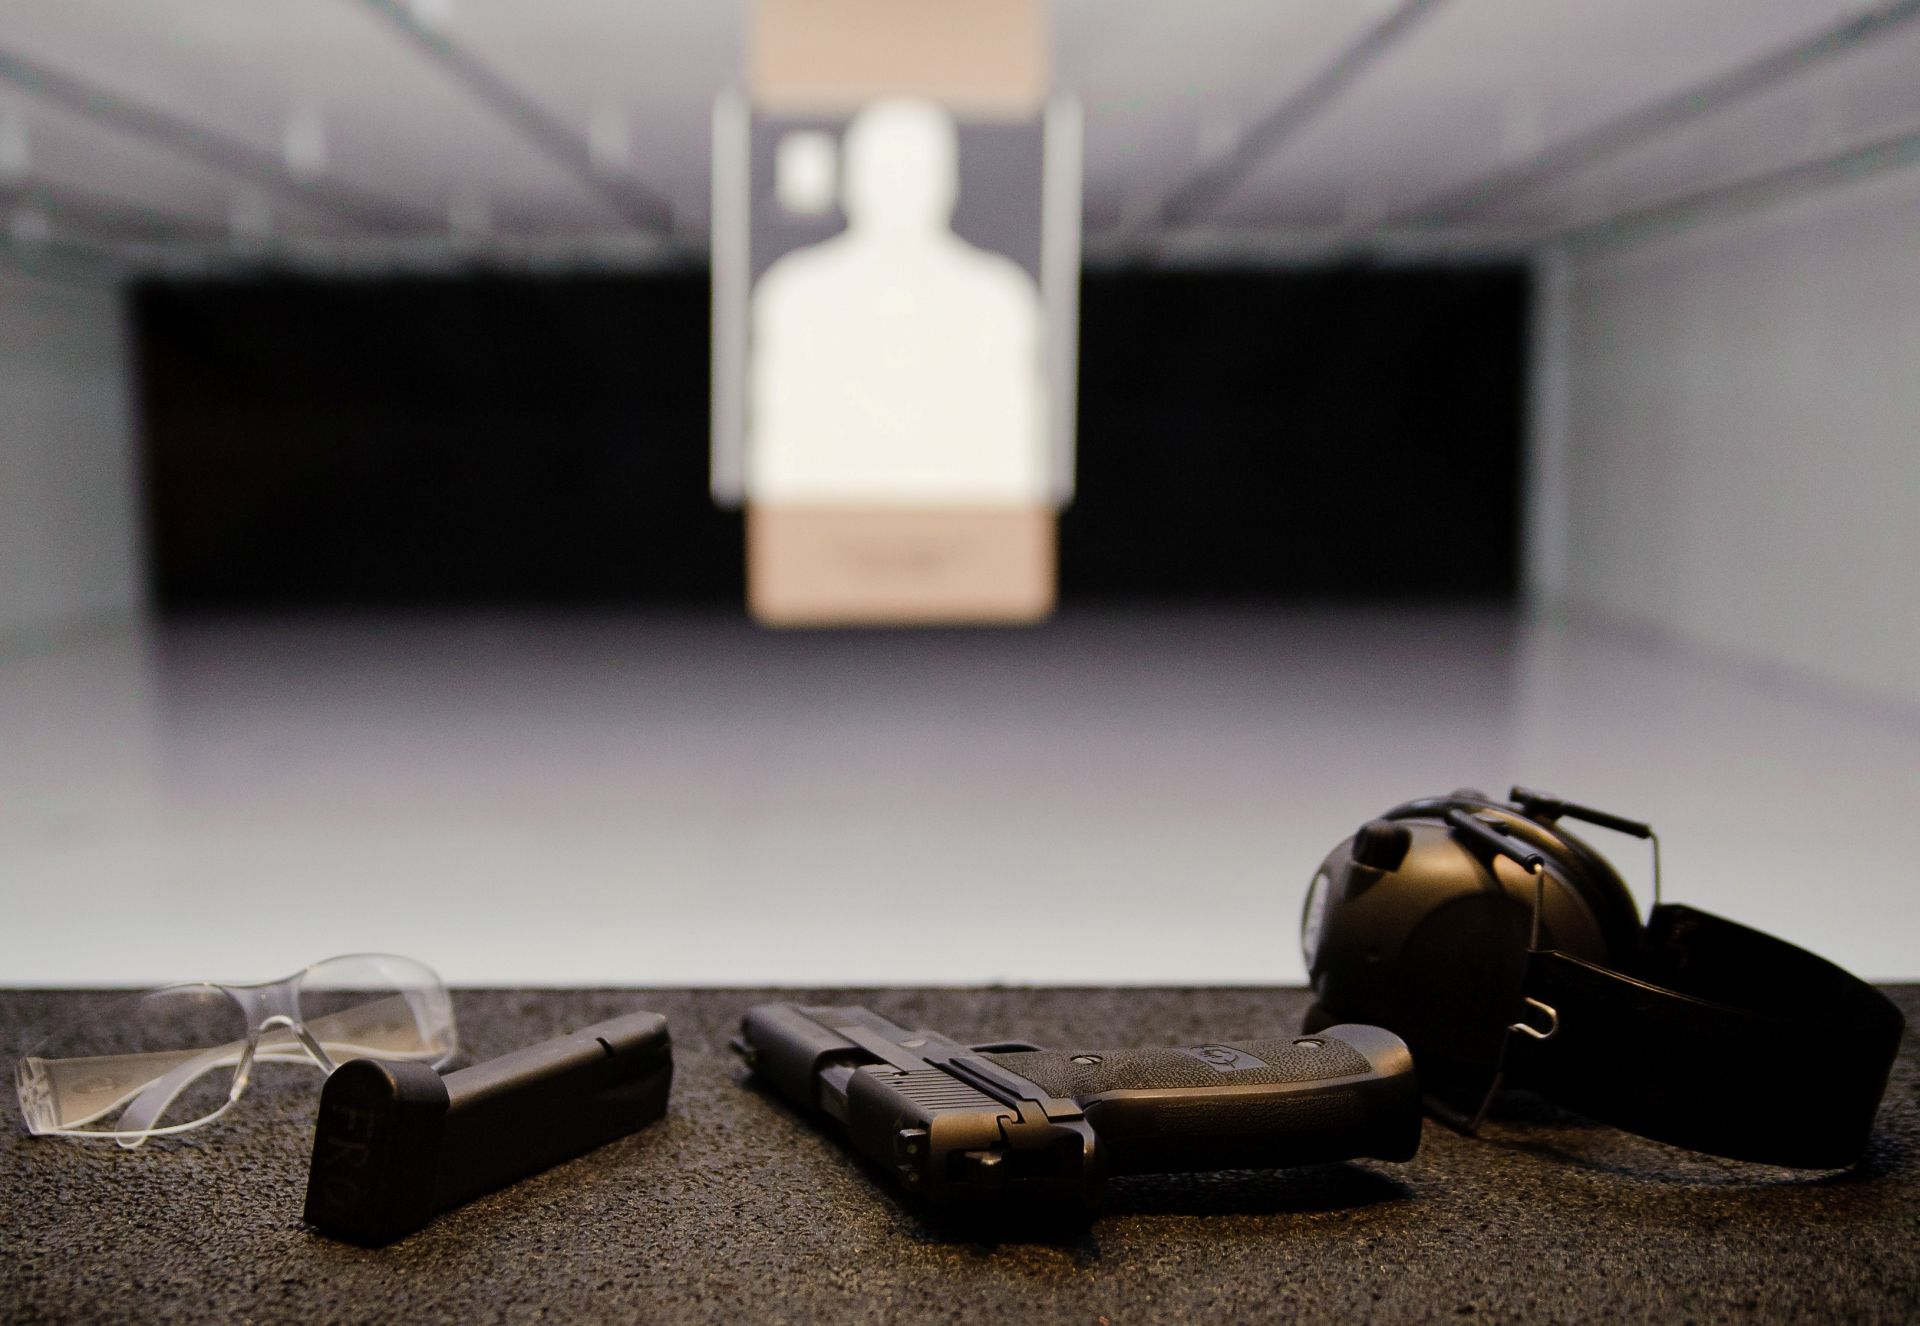 Cubic to Demonstrate Immersive Simulators for Firearms Training at SHOT Show